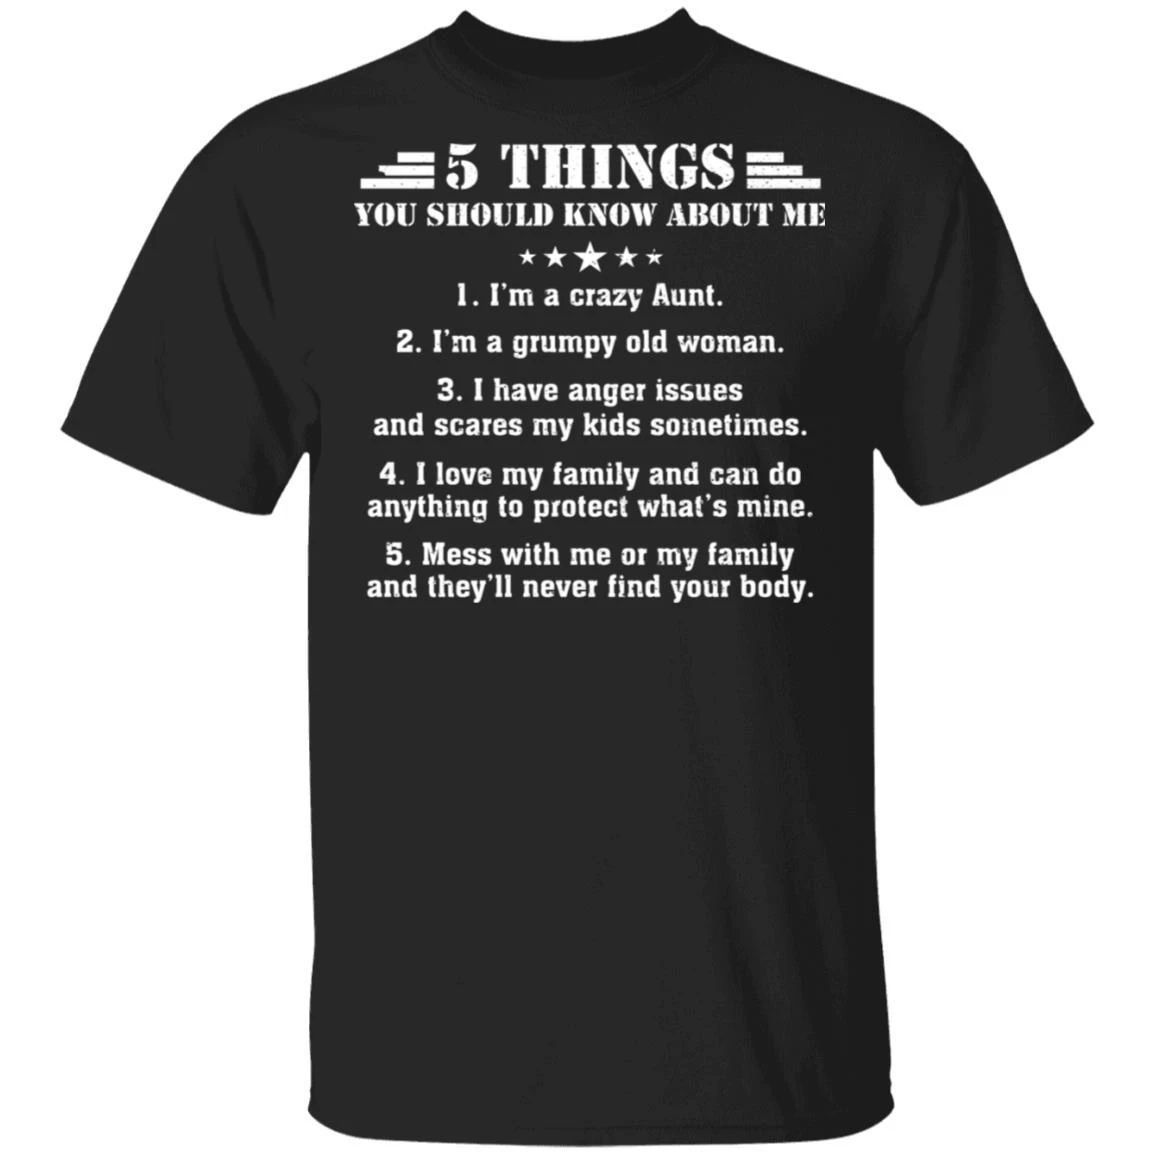 5 Things You Should Know About Me Aunt T-shirt VA05-Bounce Tee